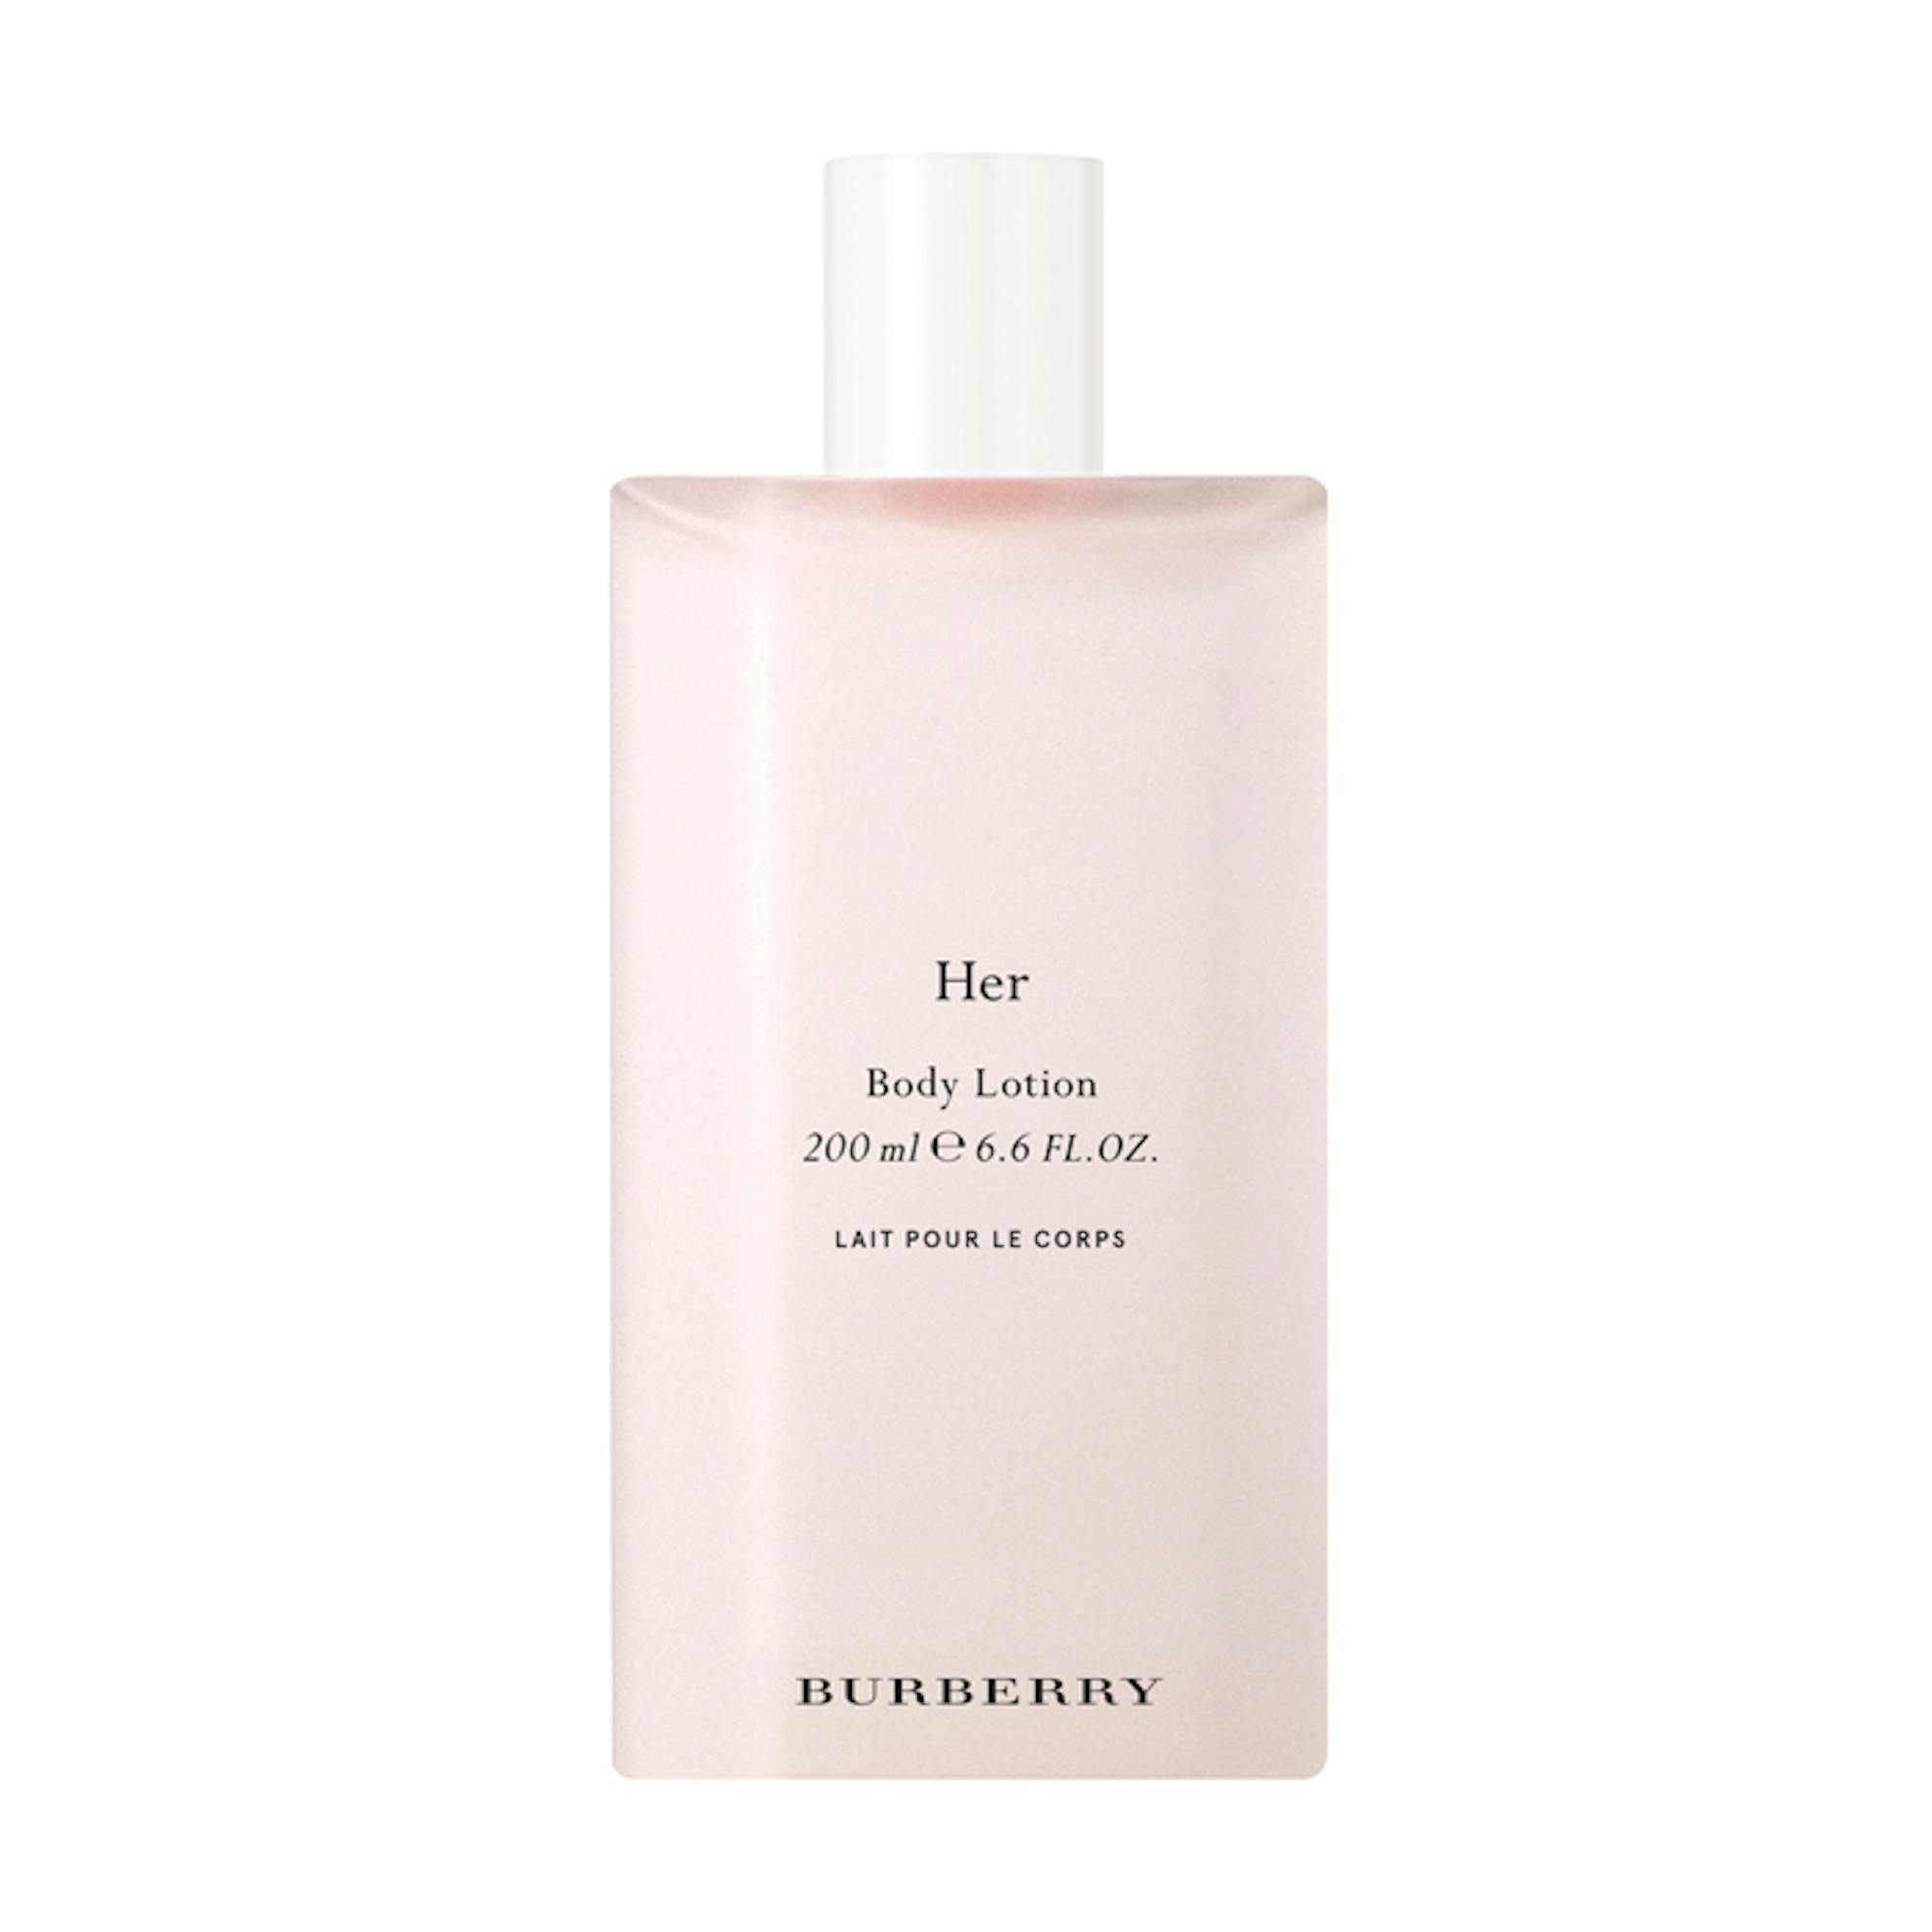 Burberry Burberry Her Body Lotion | 200ml | The Fragrance Shop | The  Fragrance Shop